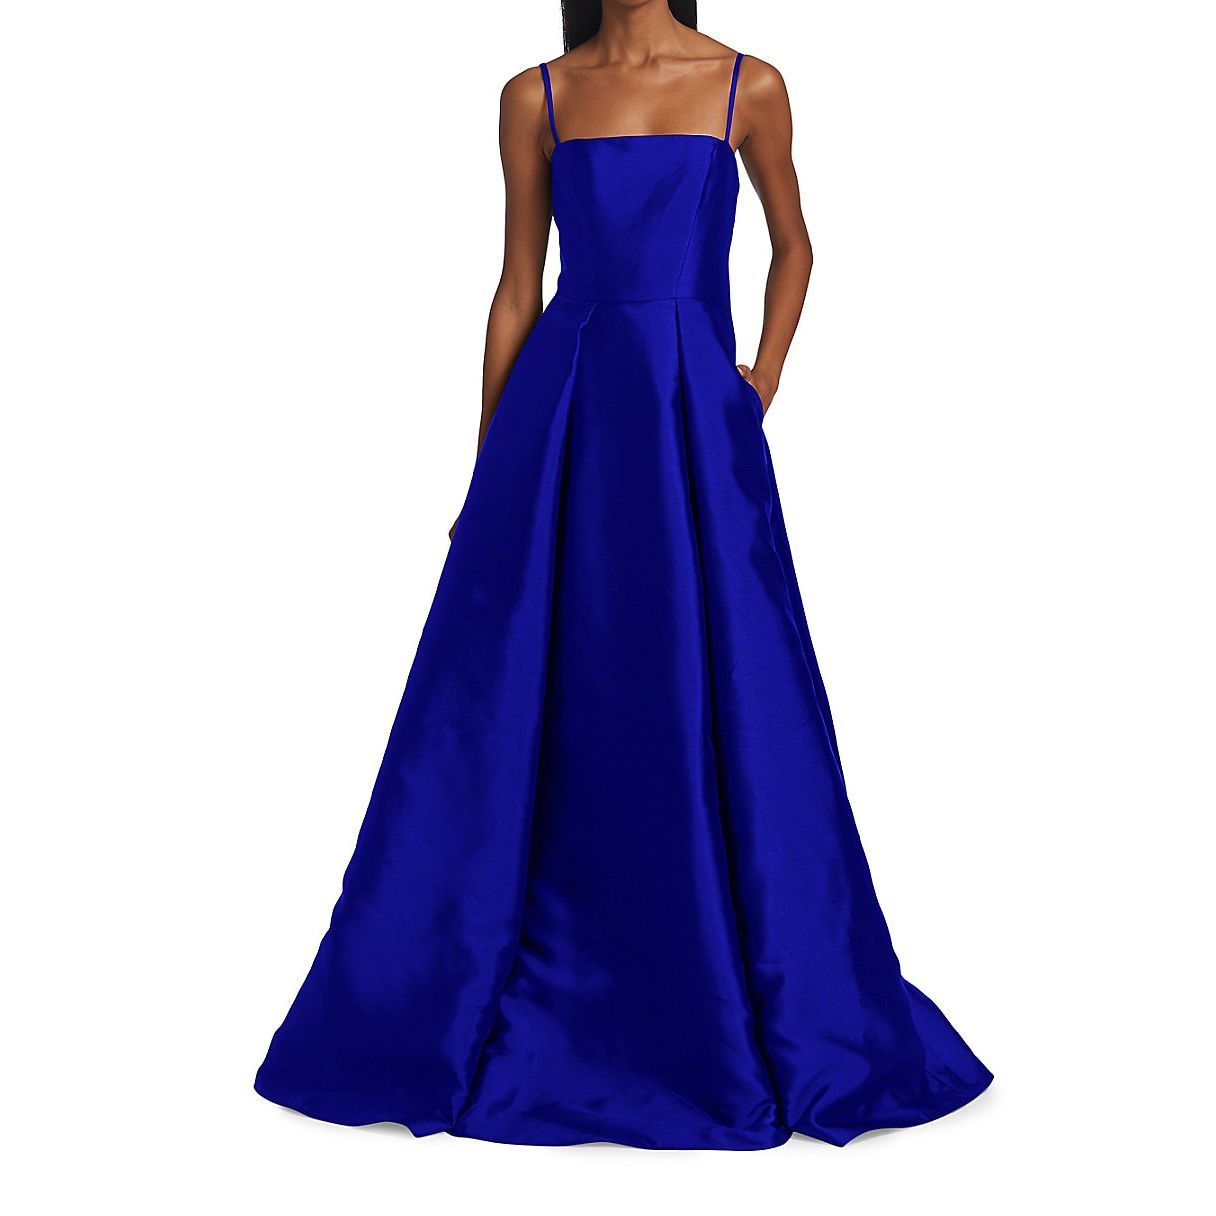 Women's Diane Pleated Satin Gown